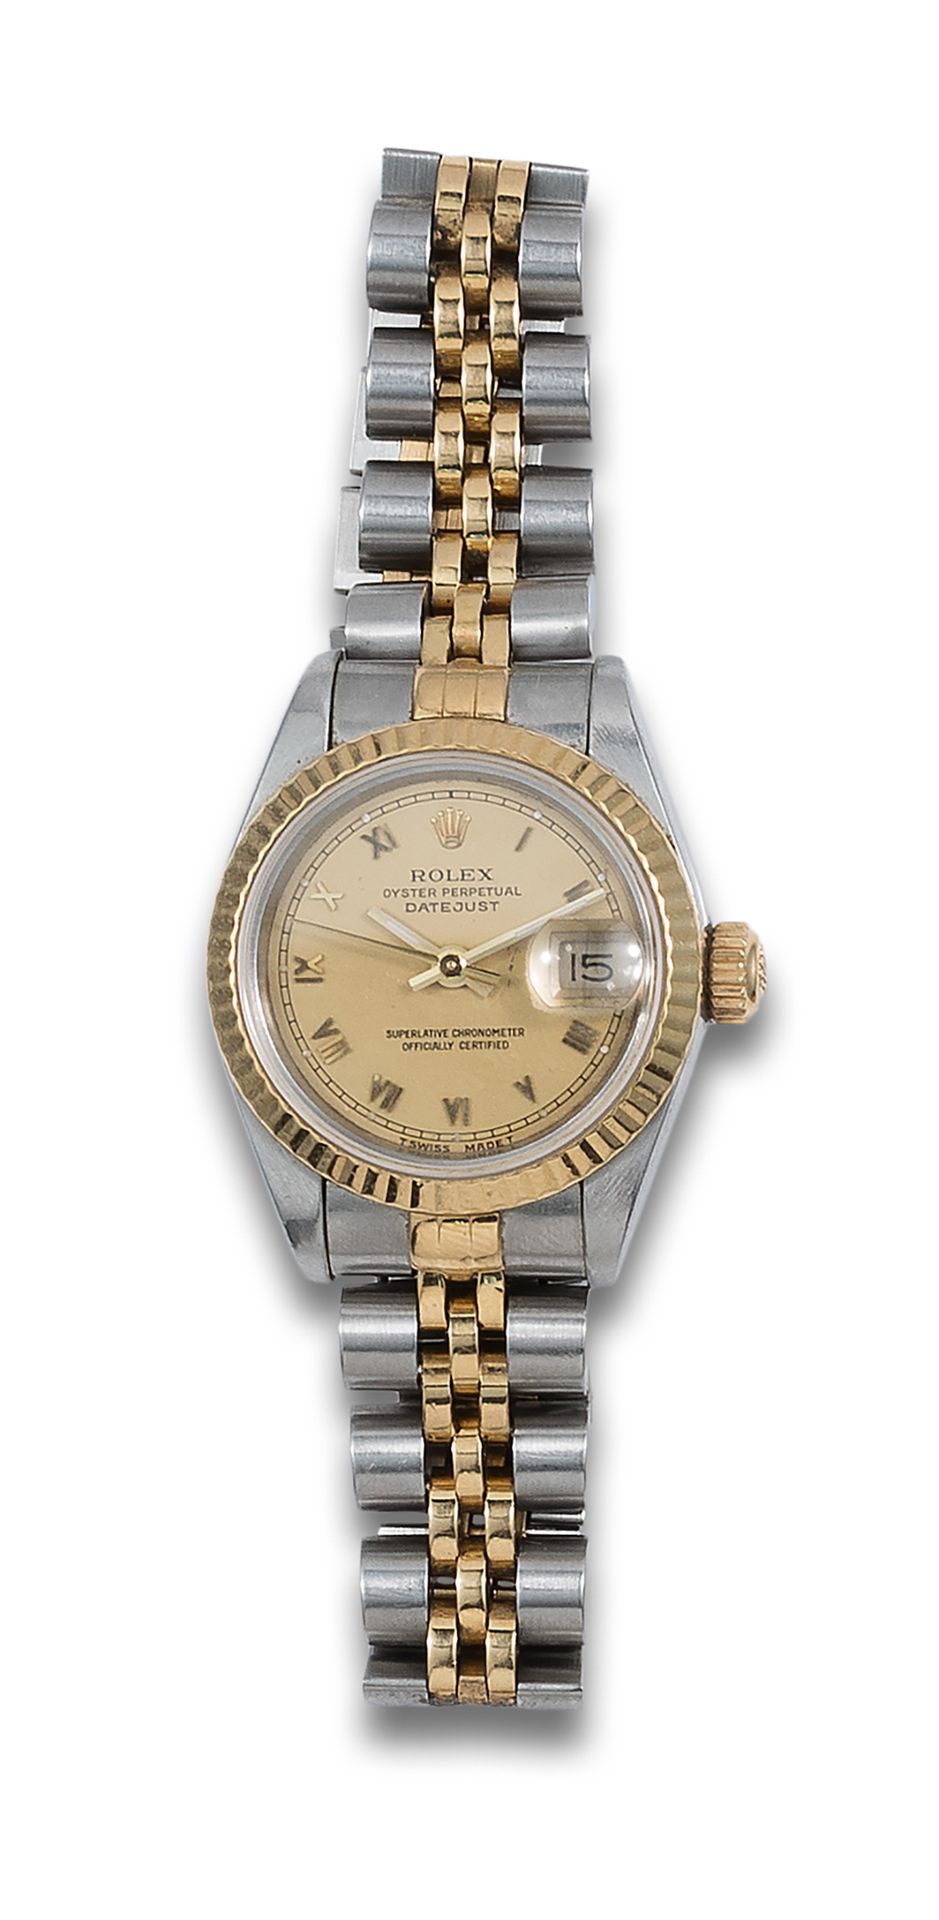 ROLEX OYSTER PERPETUAL DATEJUST WRISTWATCH IN STEEL AND GOLD ROLEX OYSTER PERPET&hellip;